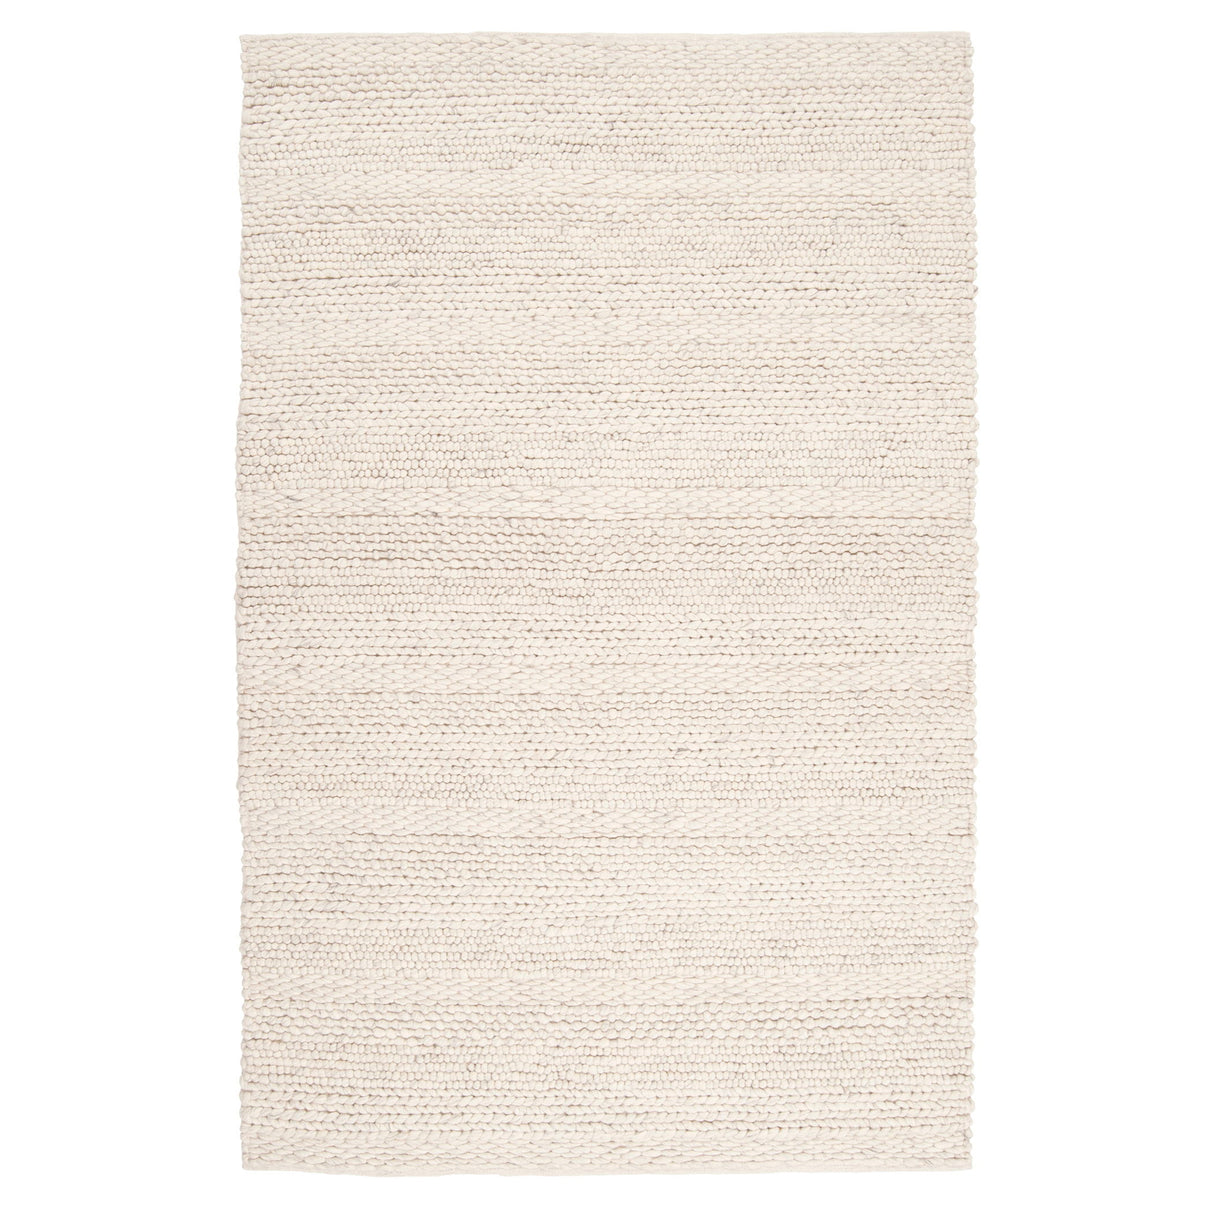 Clifton - Hand Woven 10 X 14 Rug - Ivory